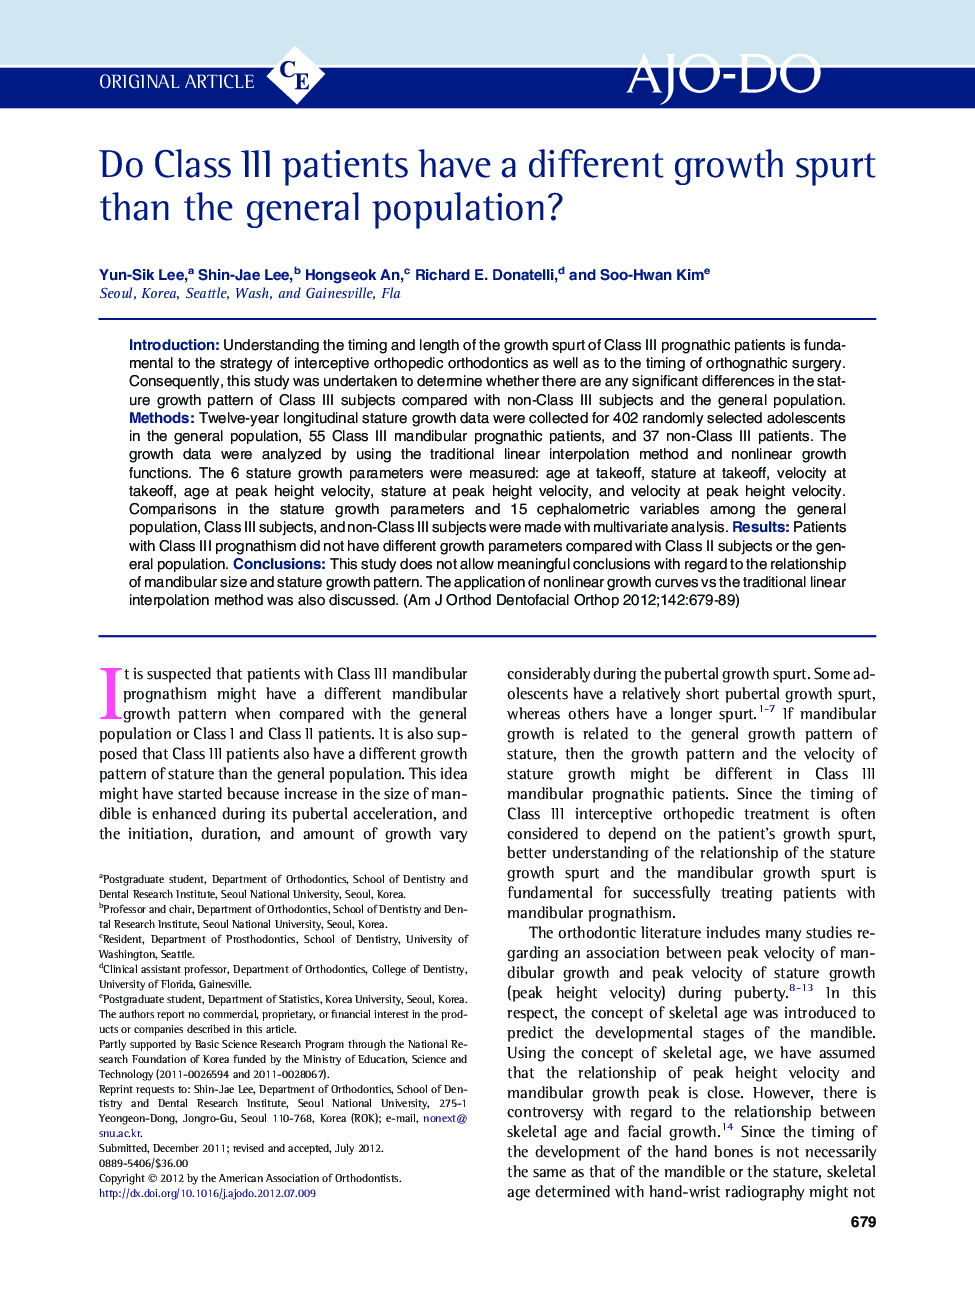 Do Class III patients have a different growth spurt than the general population? 